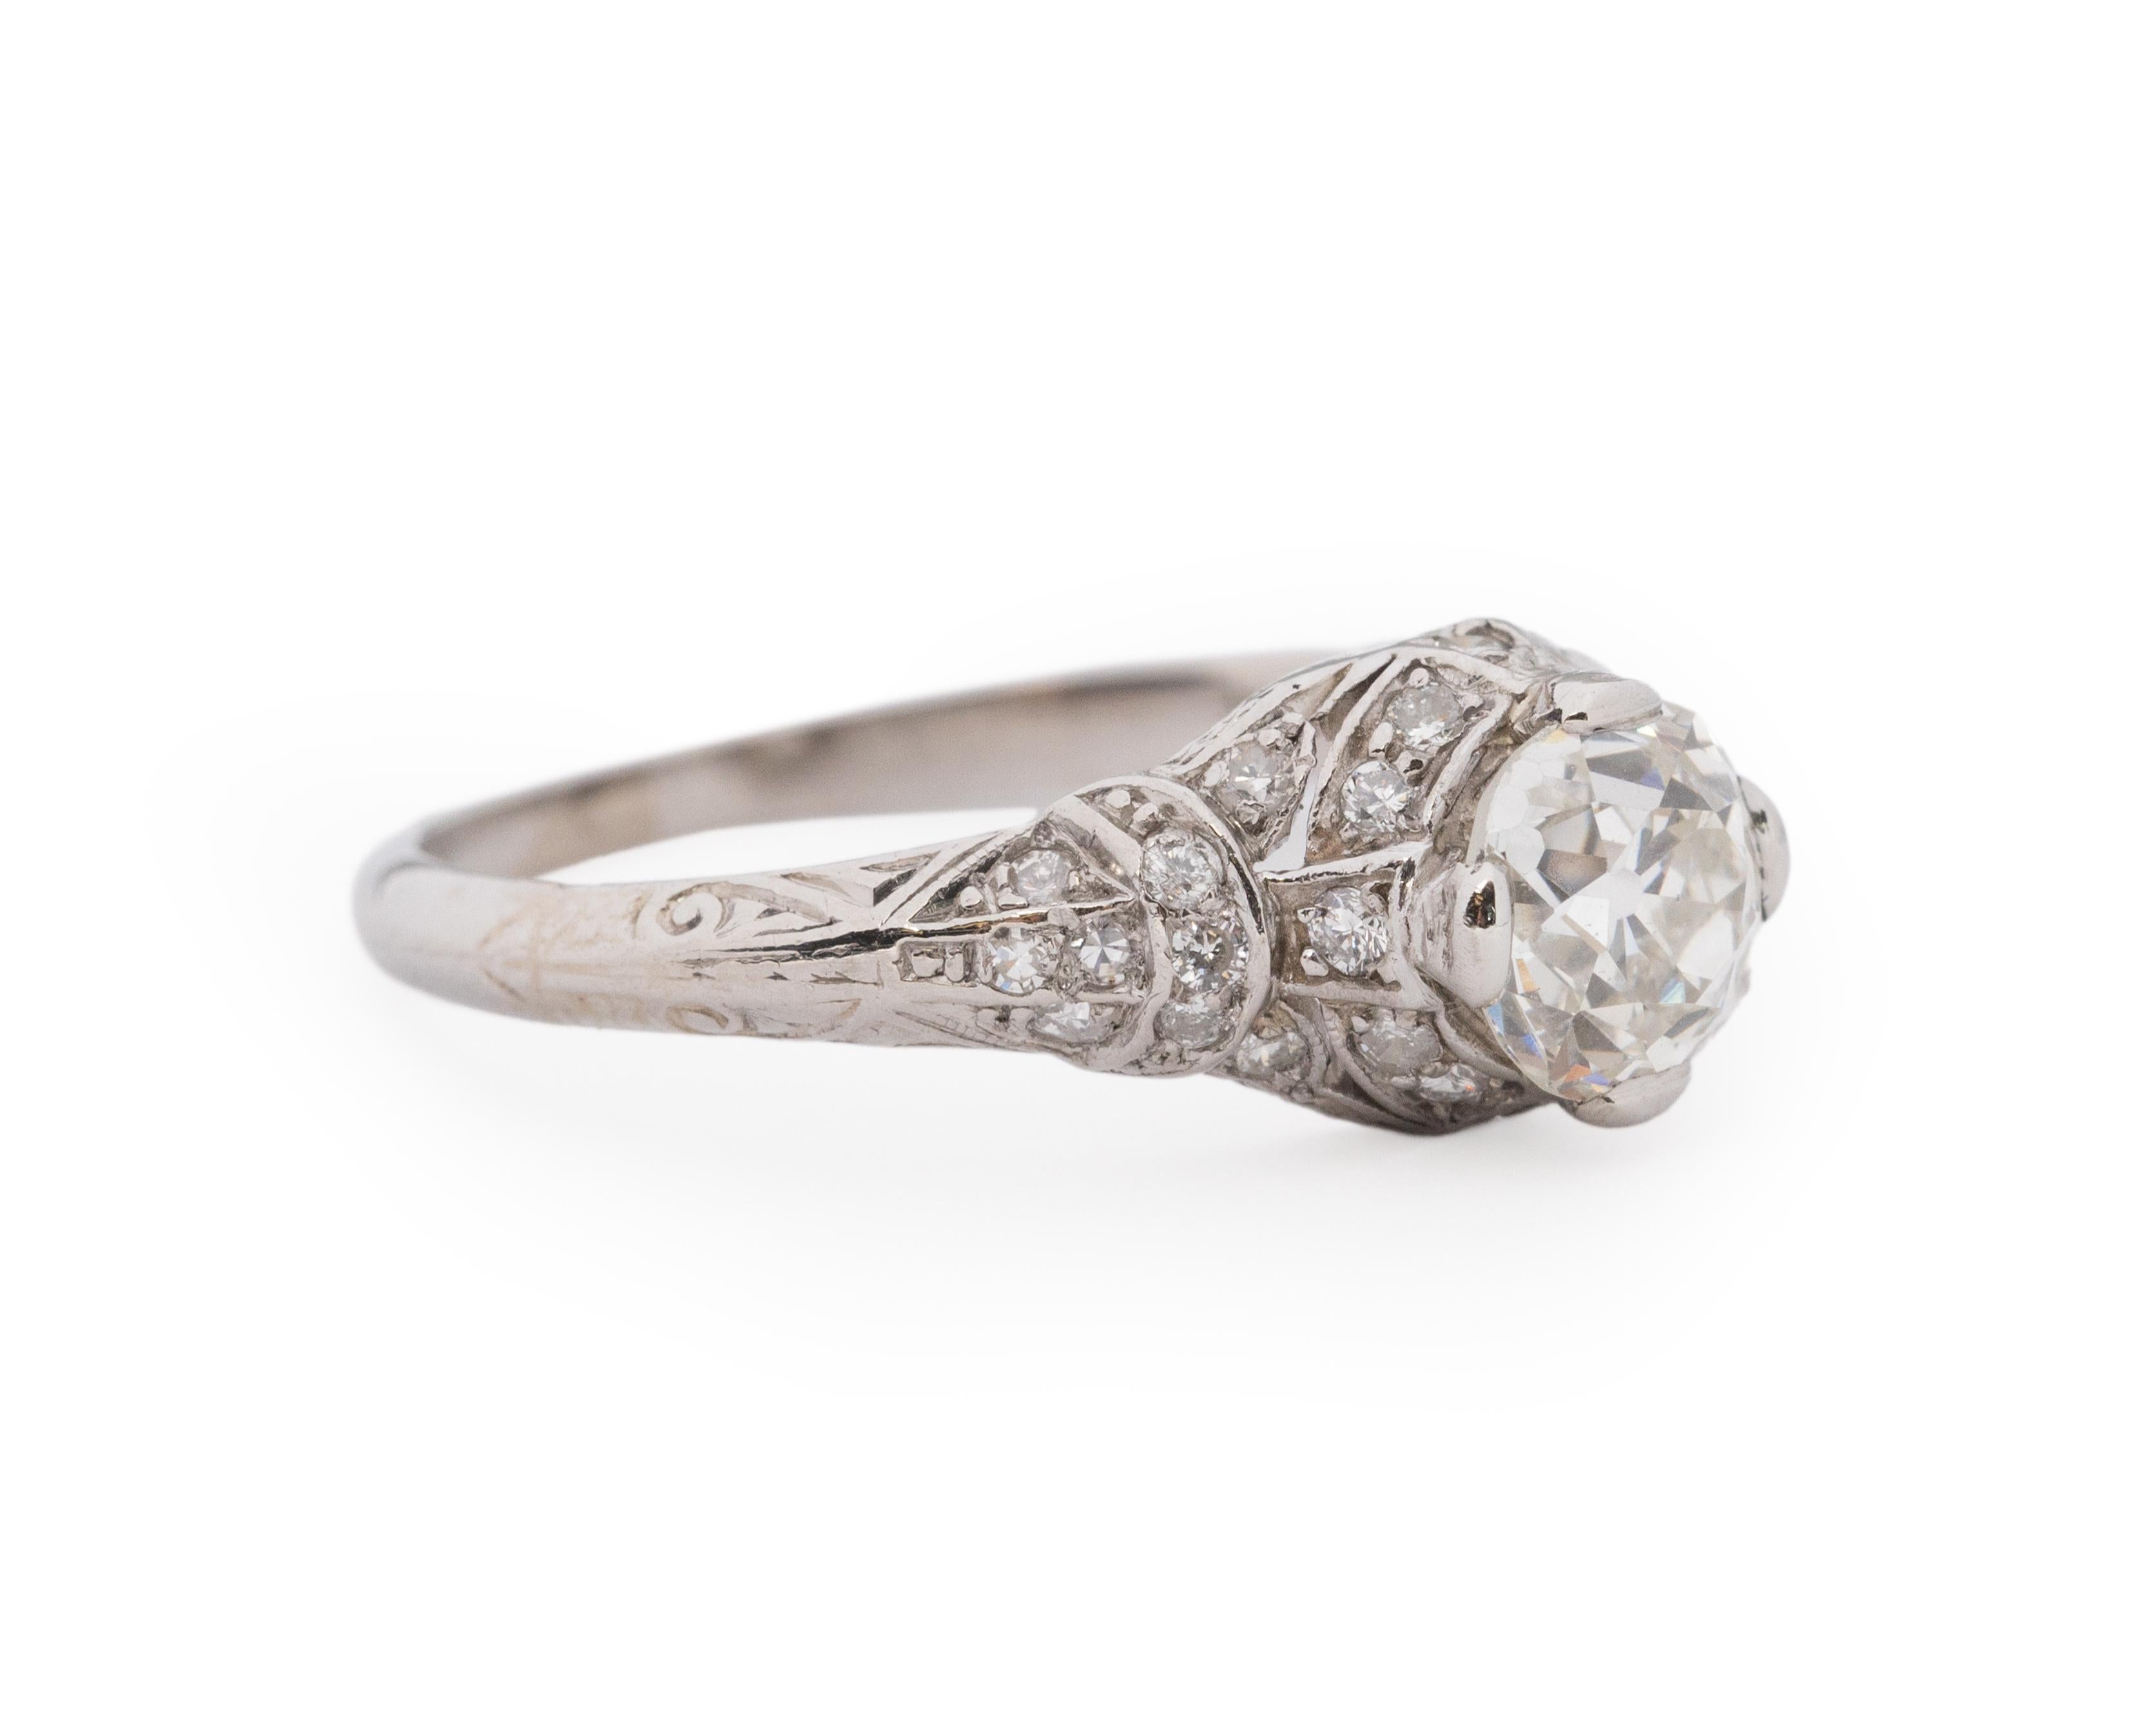 Year: 1920s

Item Details:
Ring Size: 6.75
Metal Type: Platinum [Hallmarked, and Tested]
Weight: 3.5 grams

Center Diamond Details:

GIA Report#: 2239213453
Weight: 1.01ct total weight
Cut: Old European brilliant
Color: J
Clarity: VS1
Type: